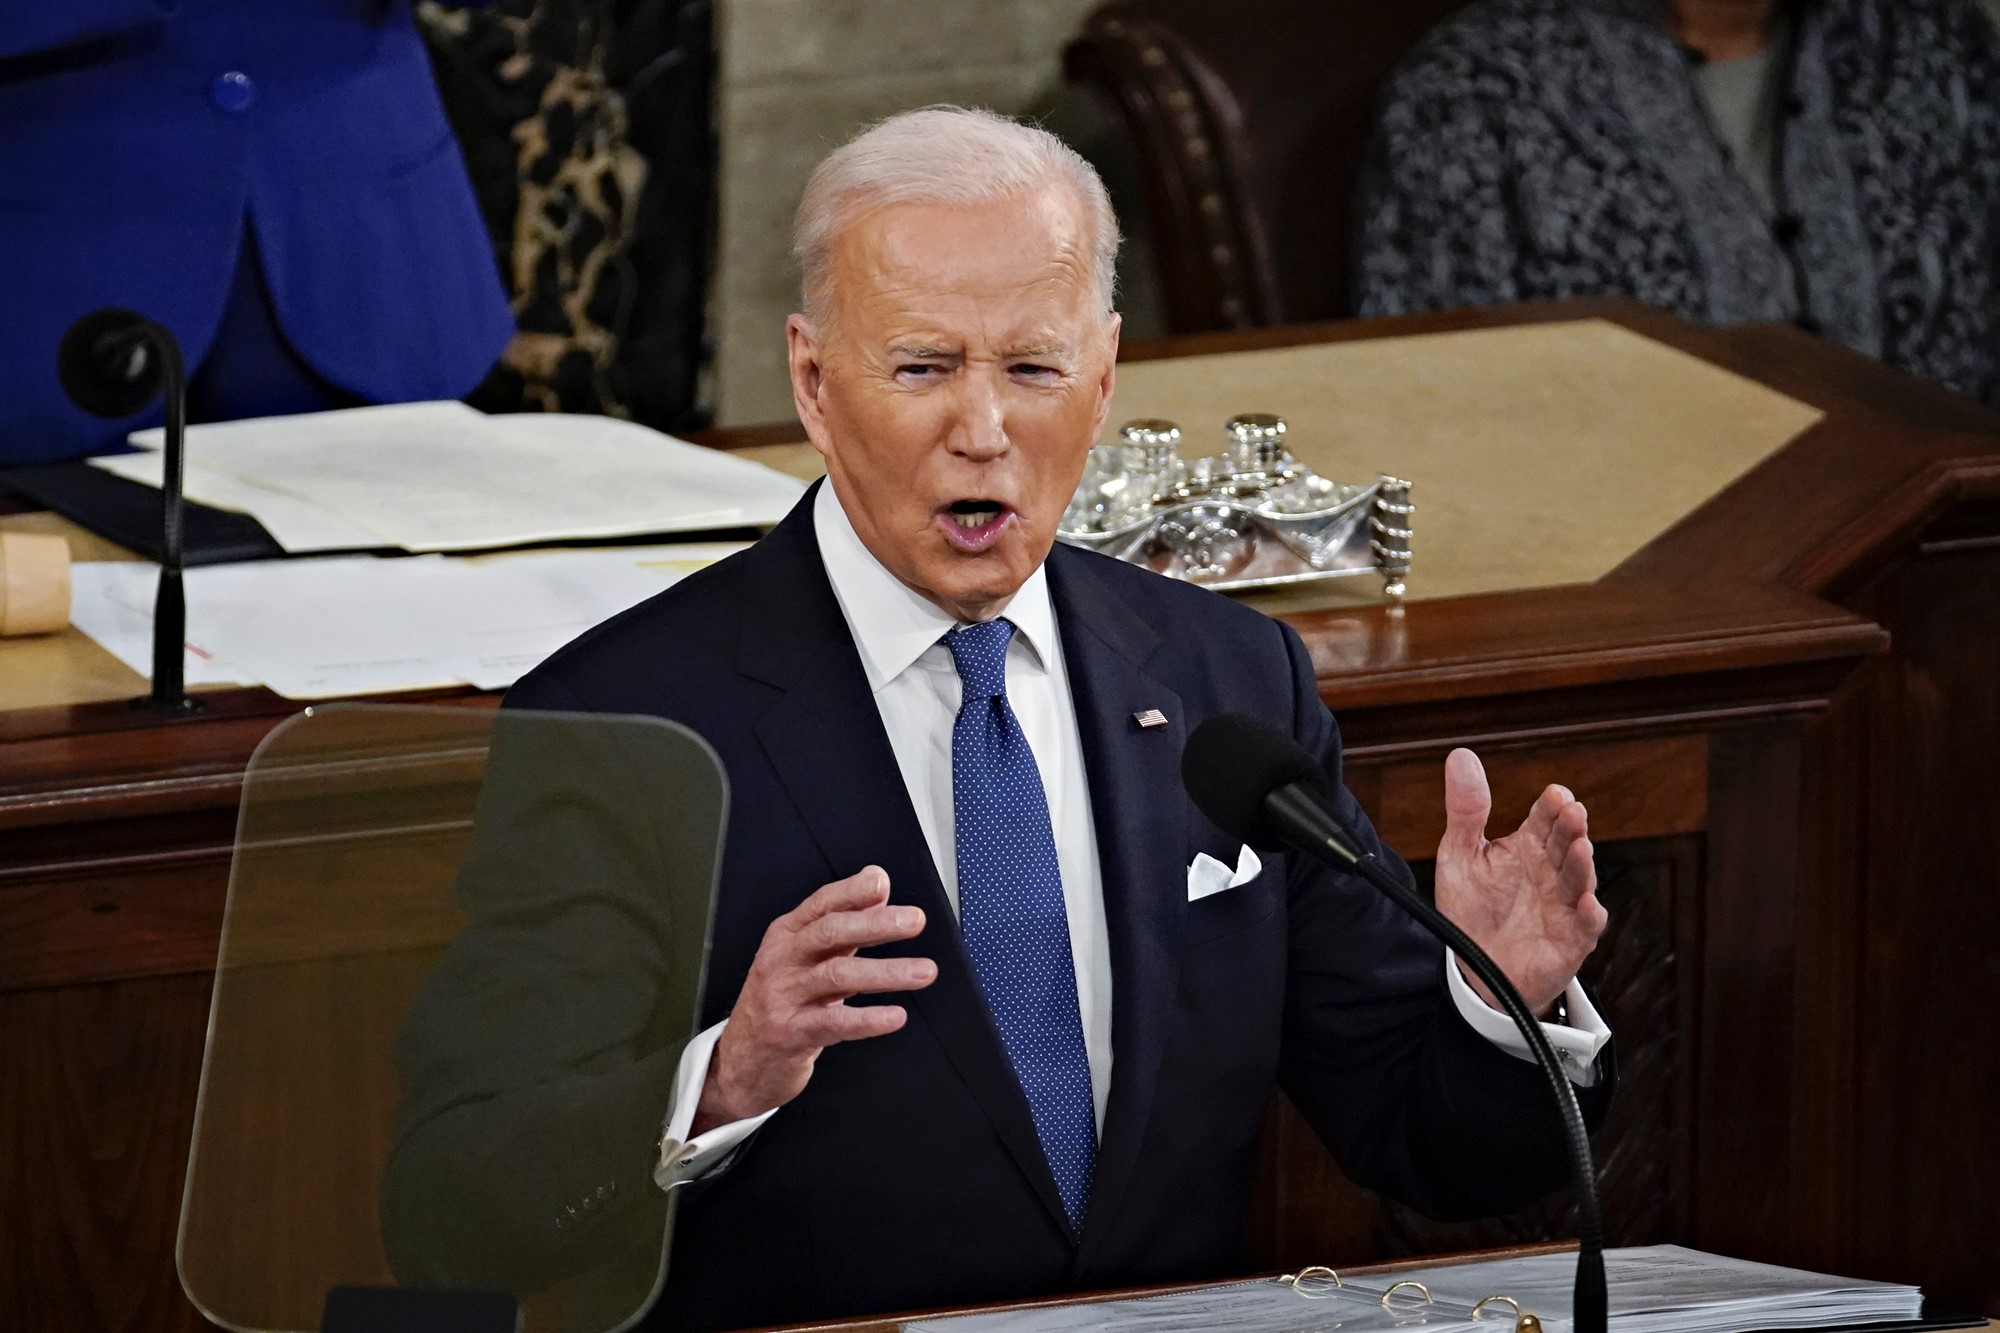 US President Joe Biden  stands at a desk with a microphone. His hands are raised. 